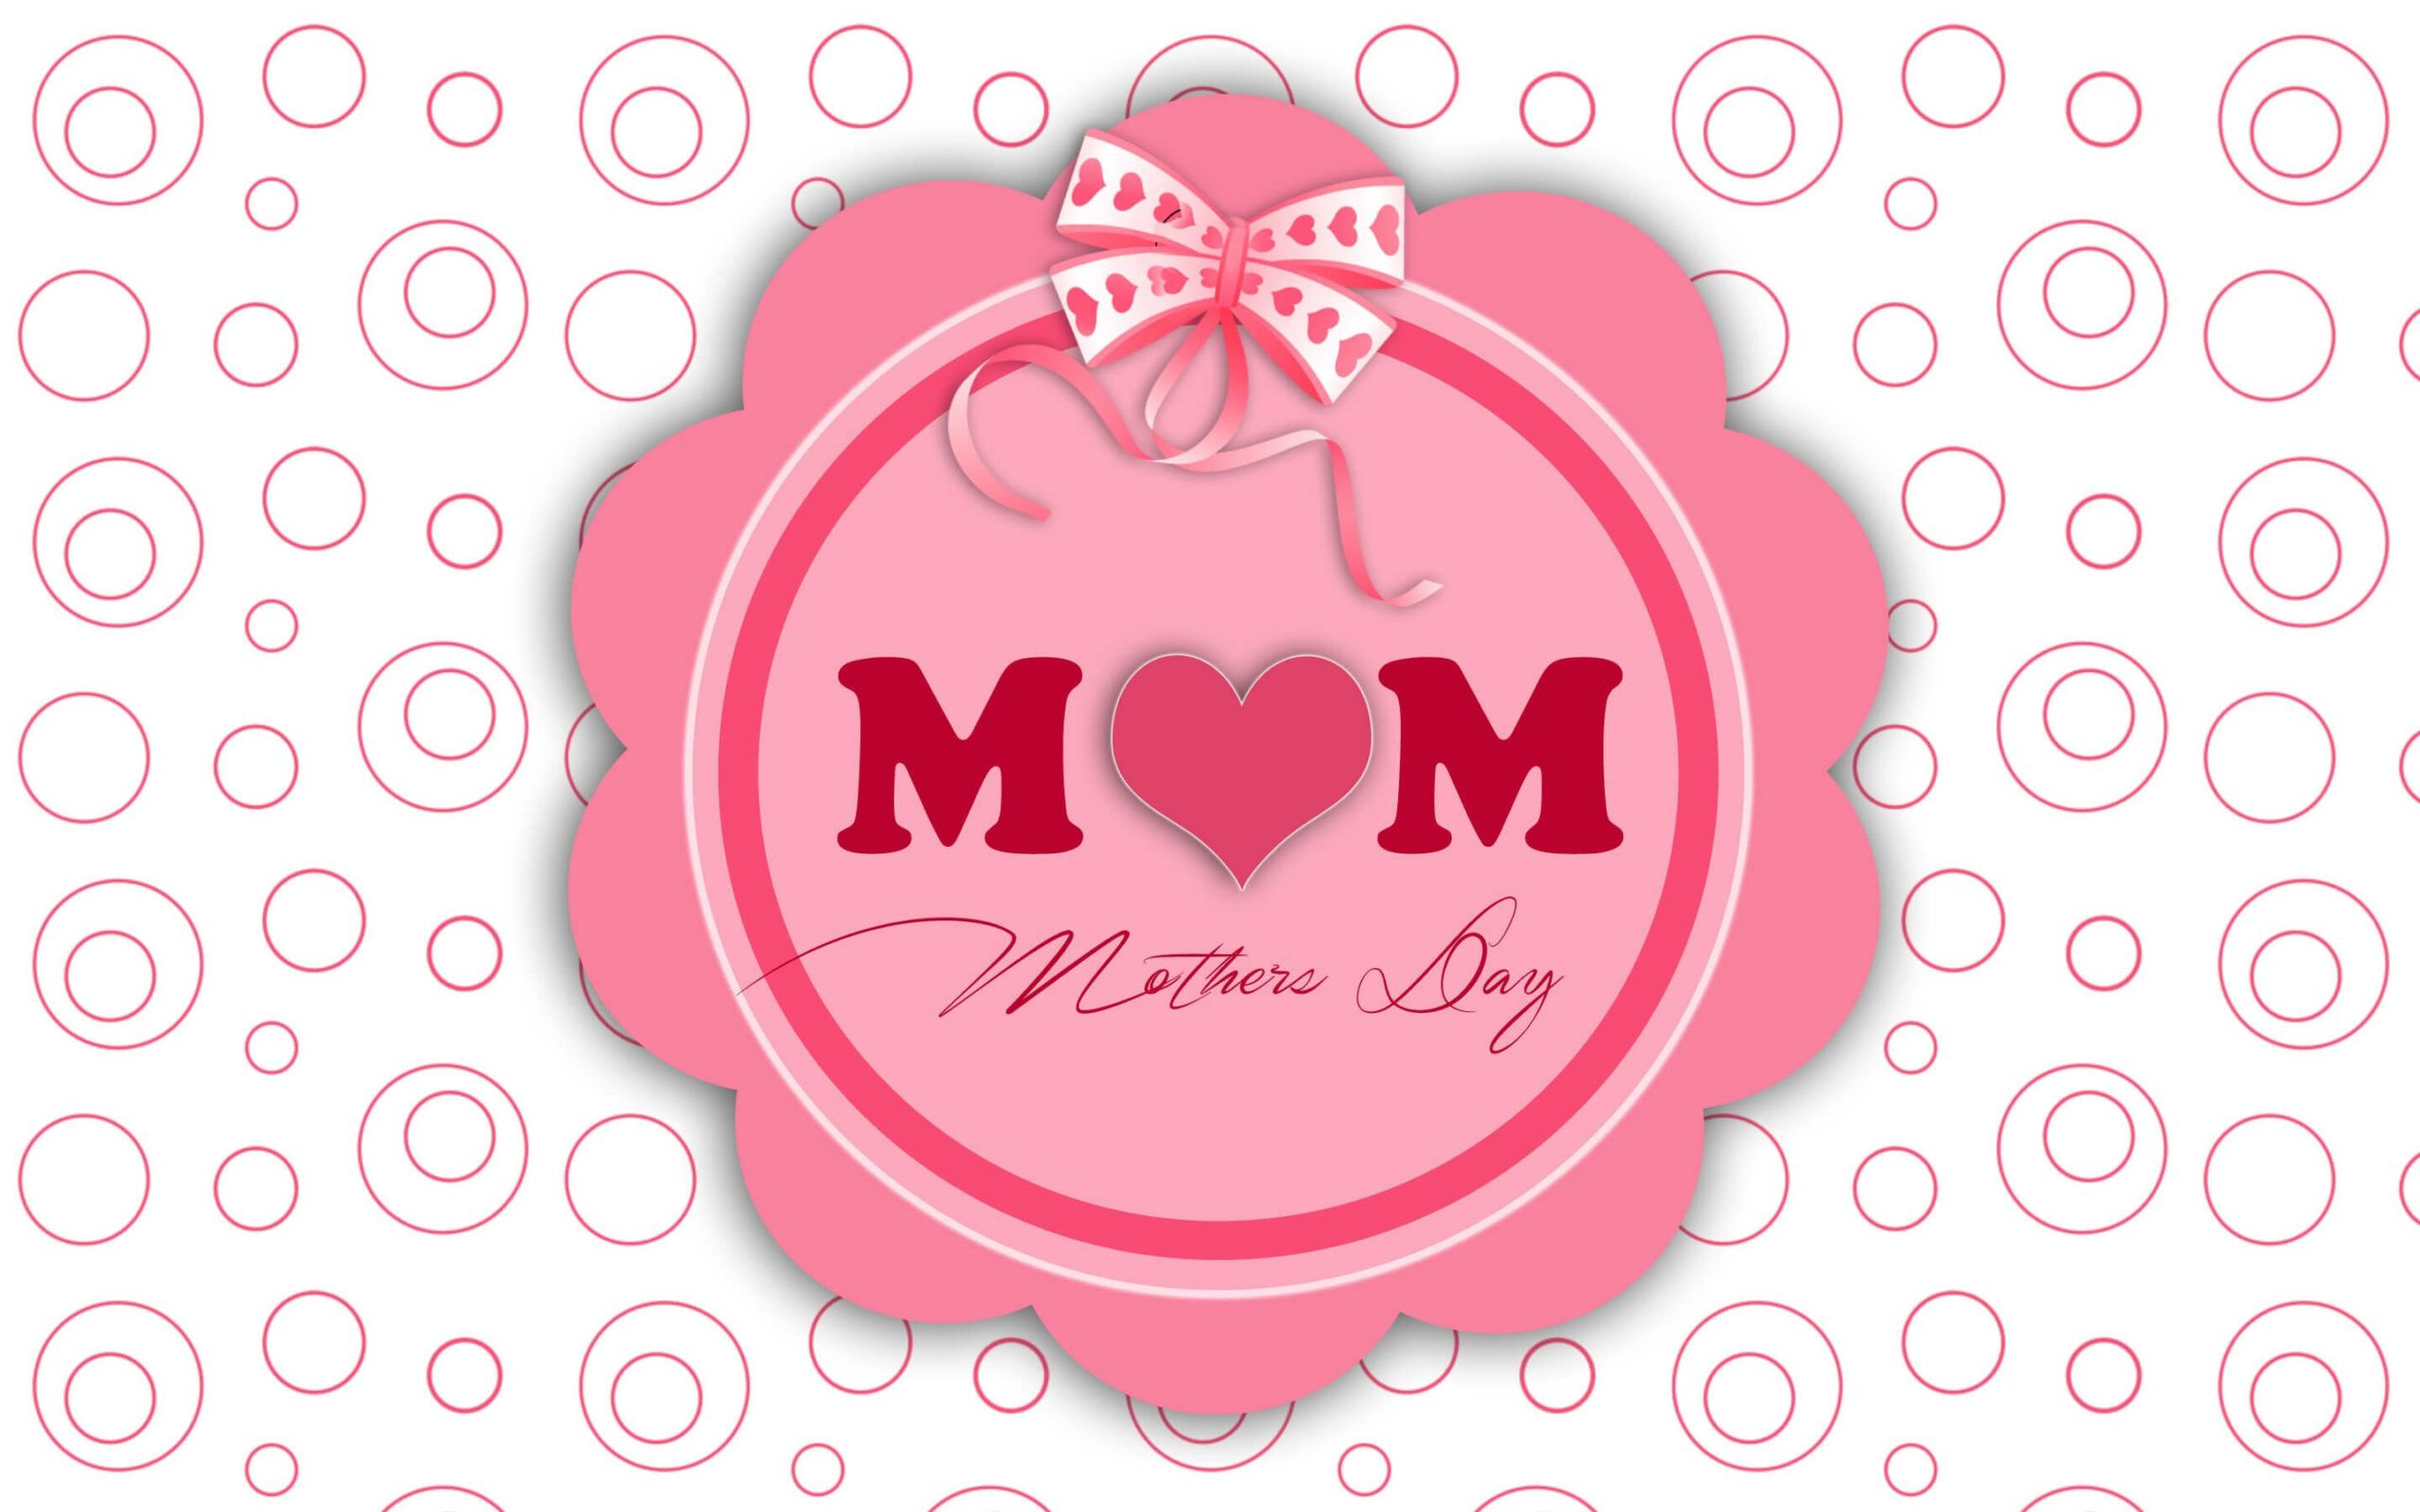 Mothers Day HD Wallpaper For Mobile & Desktop Covers